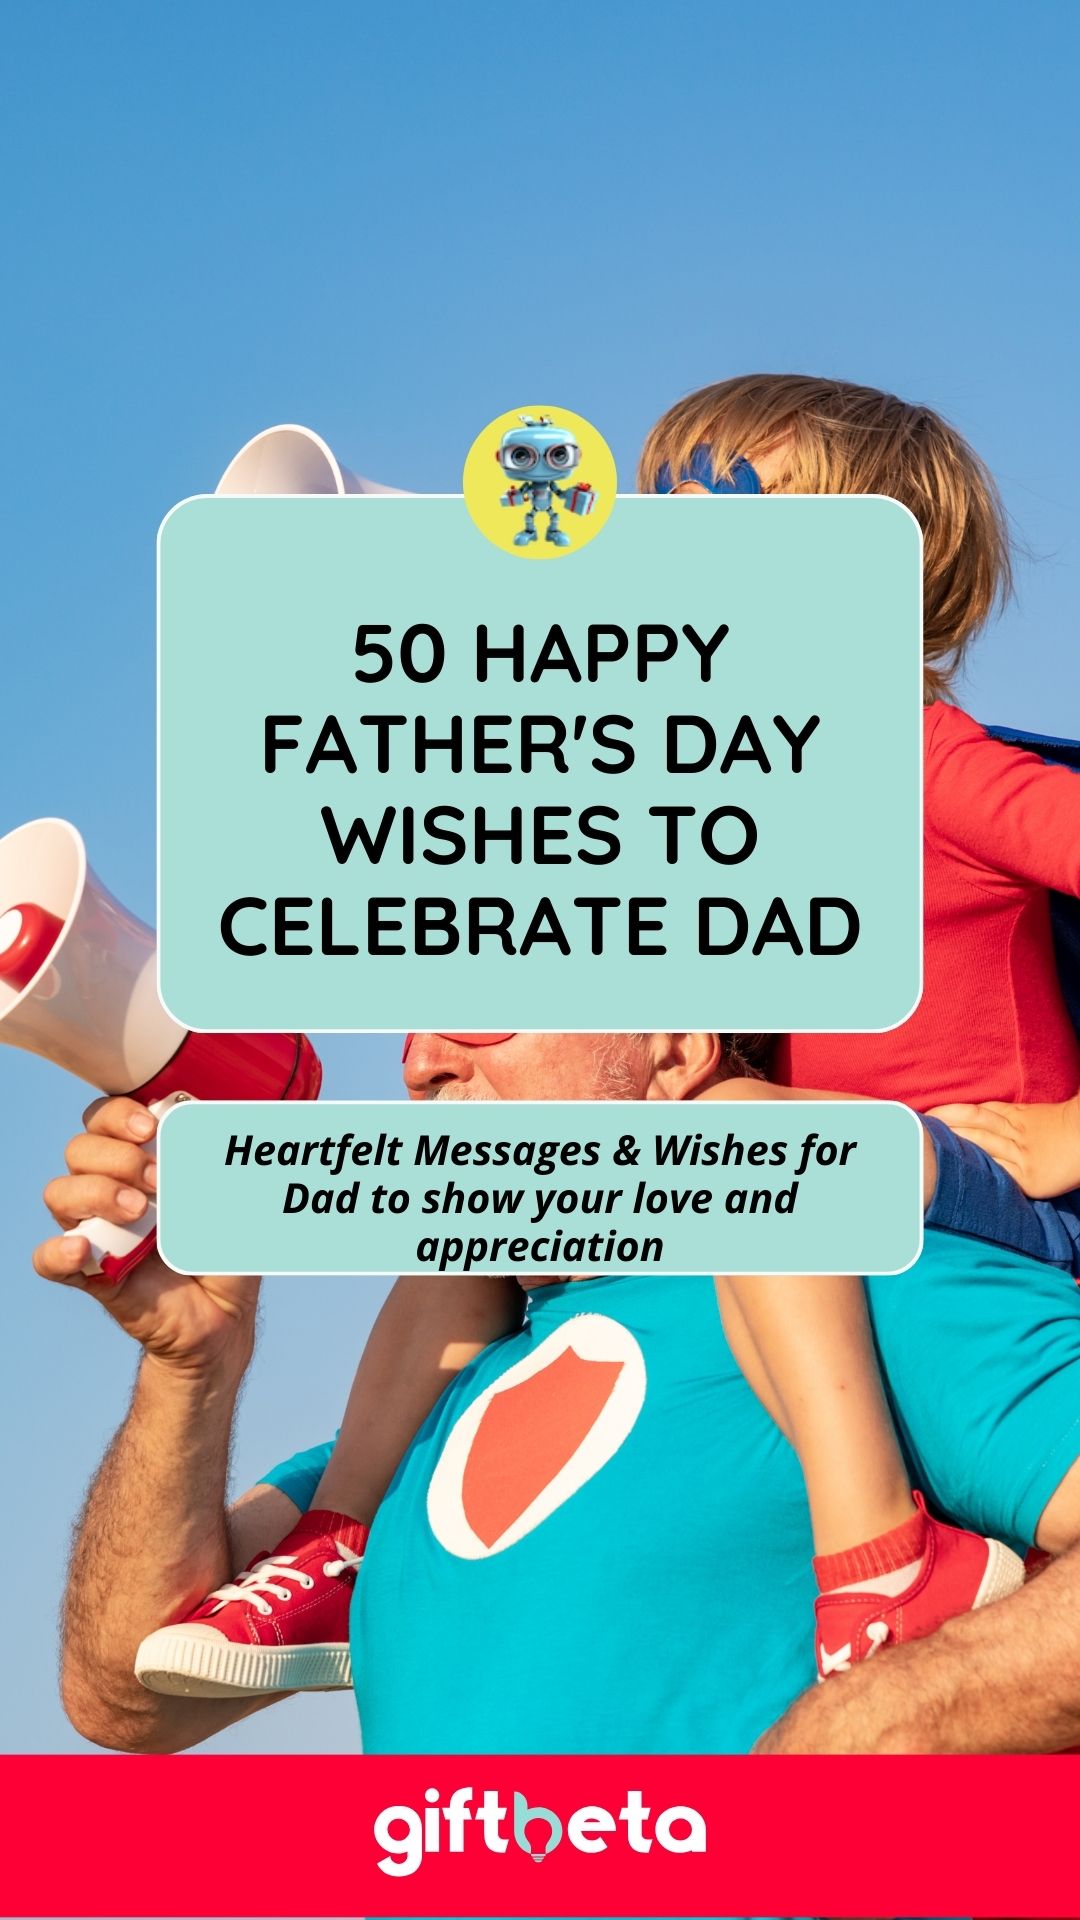 Heartfelt Messages & Wishes for Dad to show your love and appreciation.